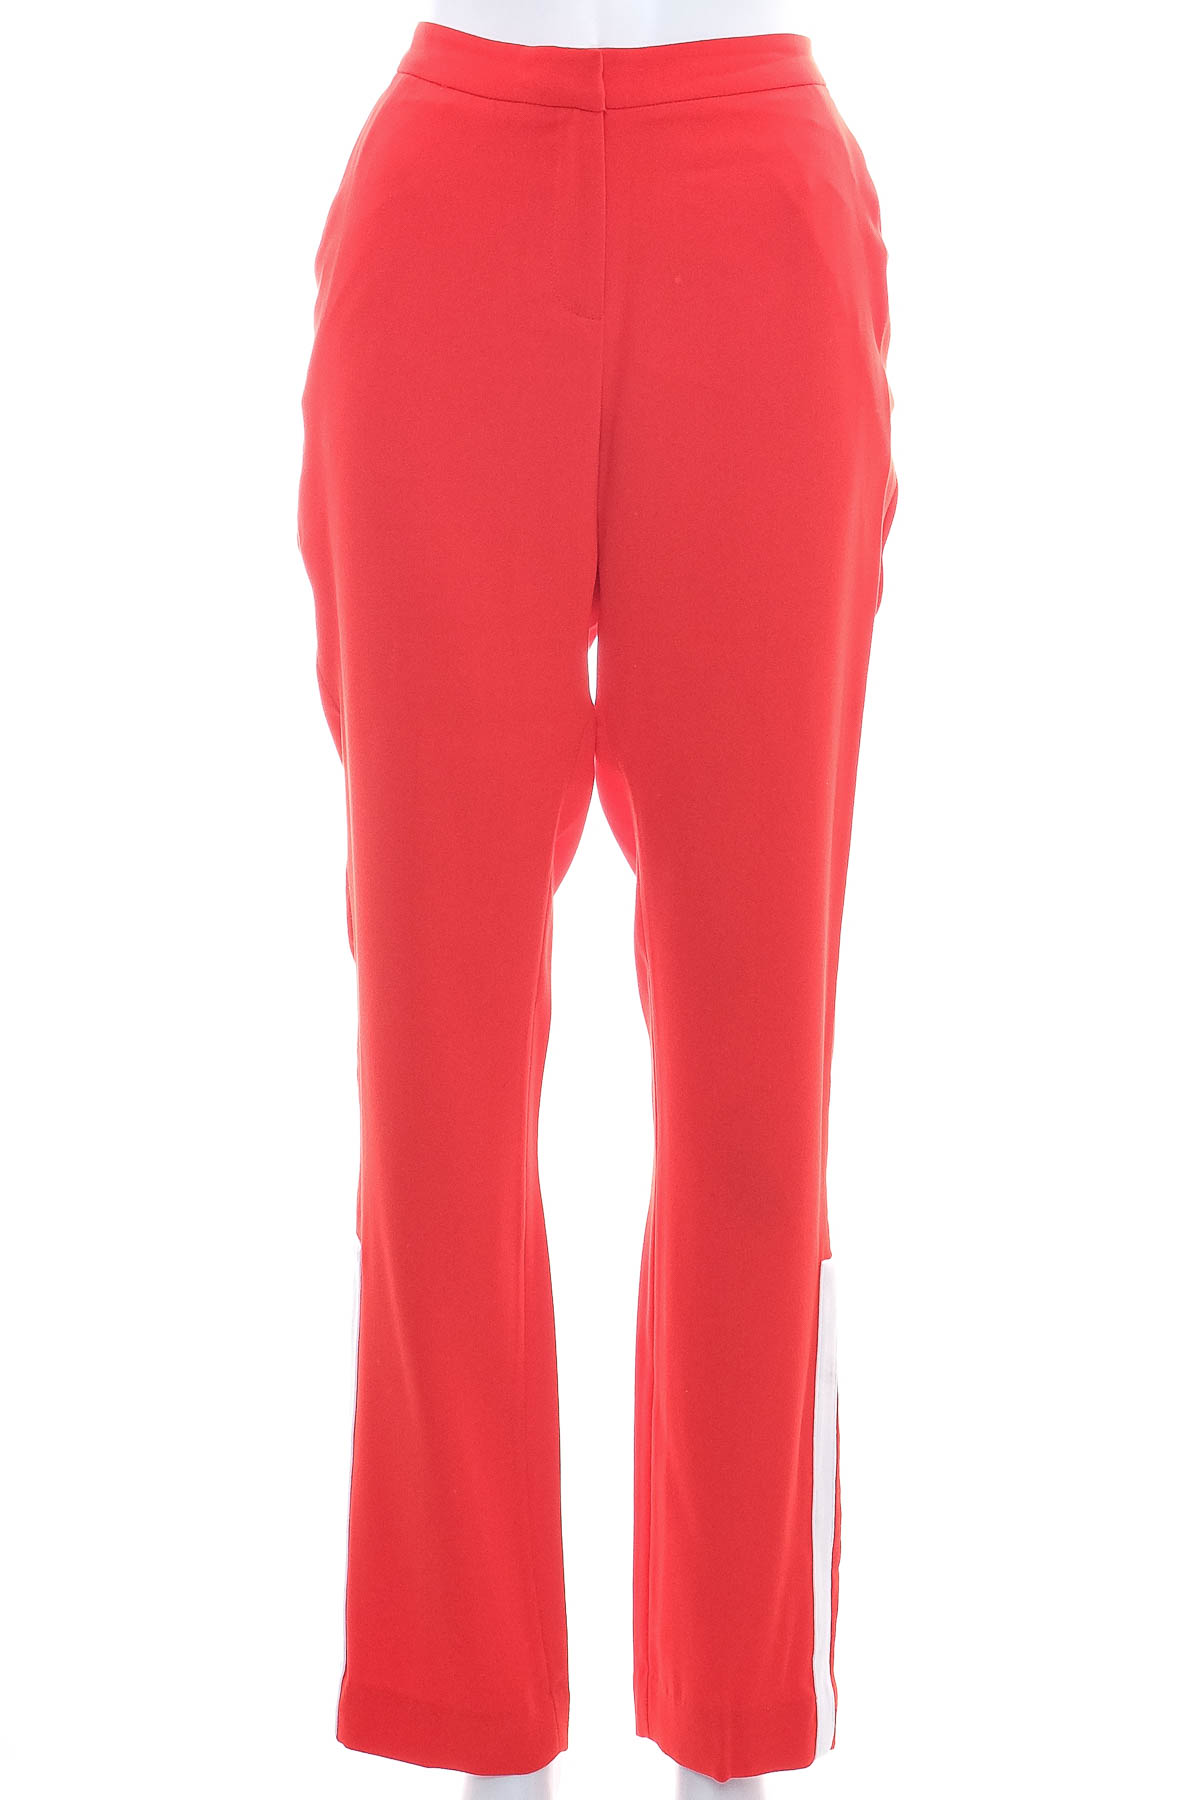 Women's trousers - Someday. - 0